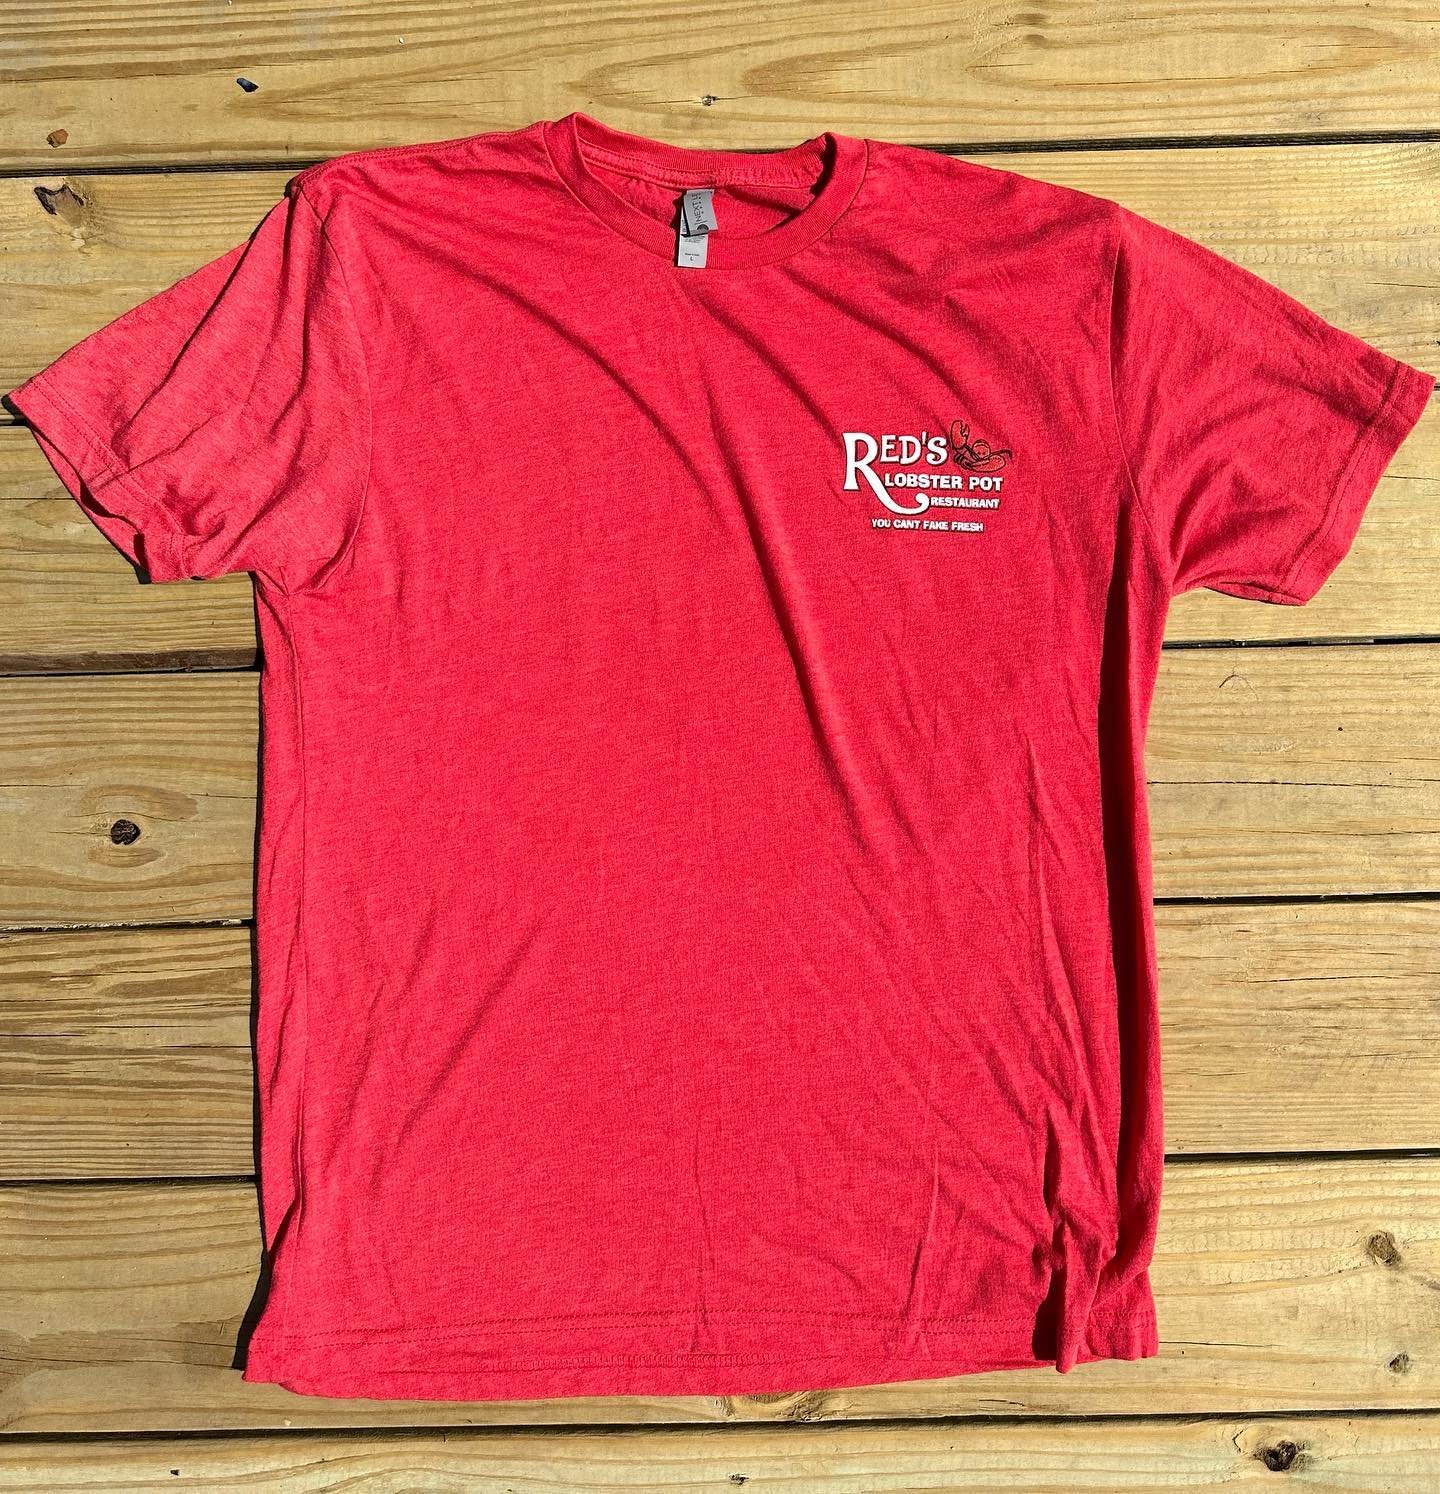 Red&rsquo;s Apparel is on Sale! T-Shirts, Baseball Tees, and Hoodies are discounted and available in limited quantities. Head to our website under &ldquo;Merch&rdquo; and place your order before they are all gone!

P.S. We open one week from today on